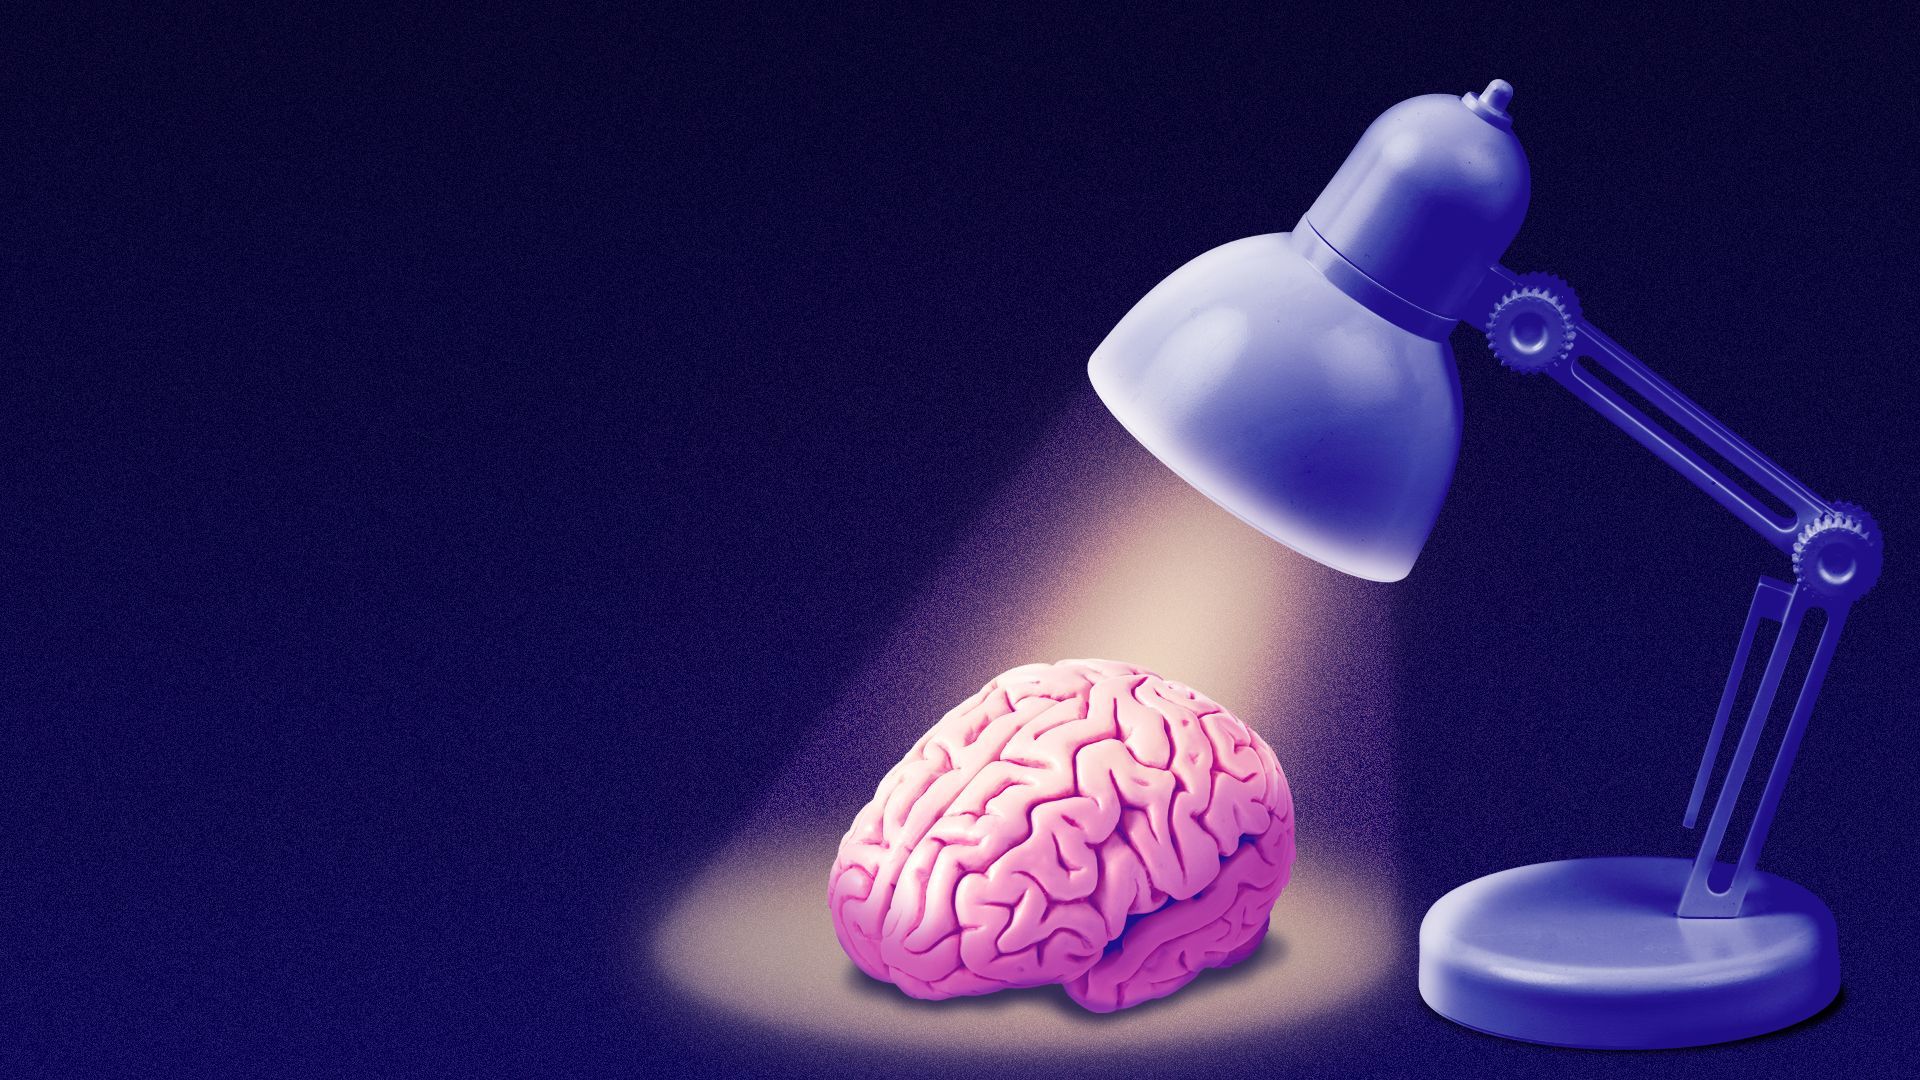 Illustration of a desk lamp shining down upon a human brain